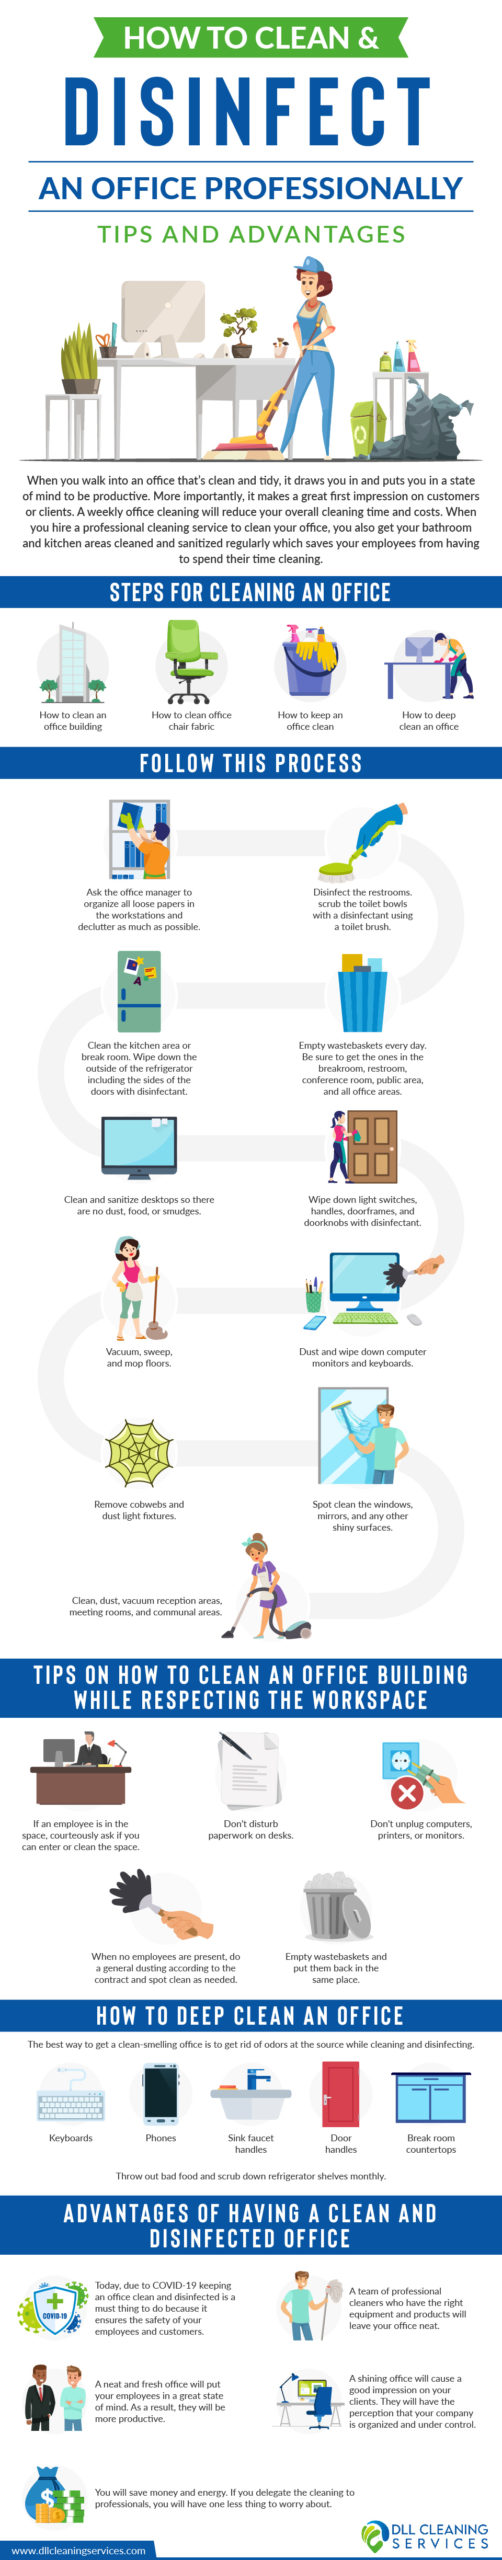 Here's How to Clean and Disinfect an Office Like a Pro - Infographic